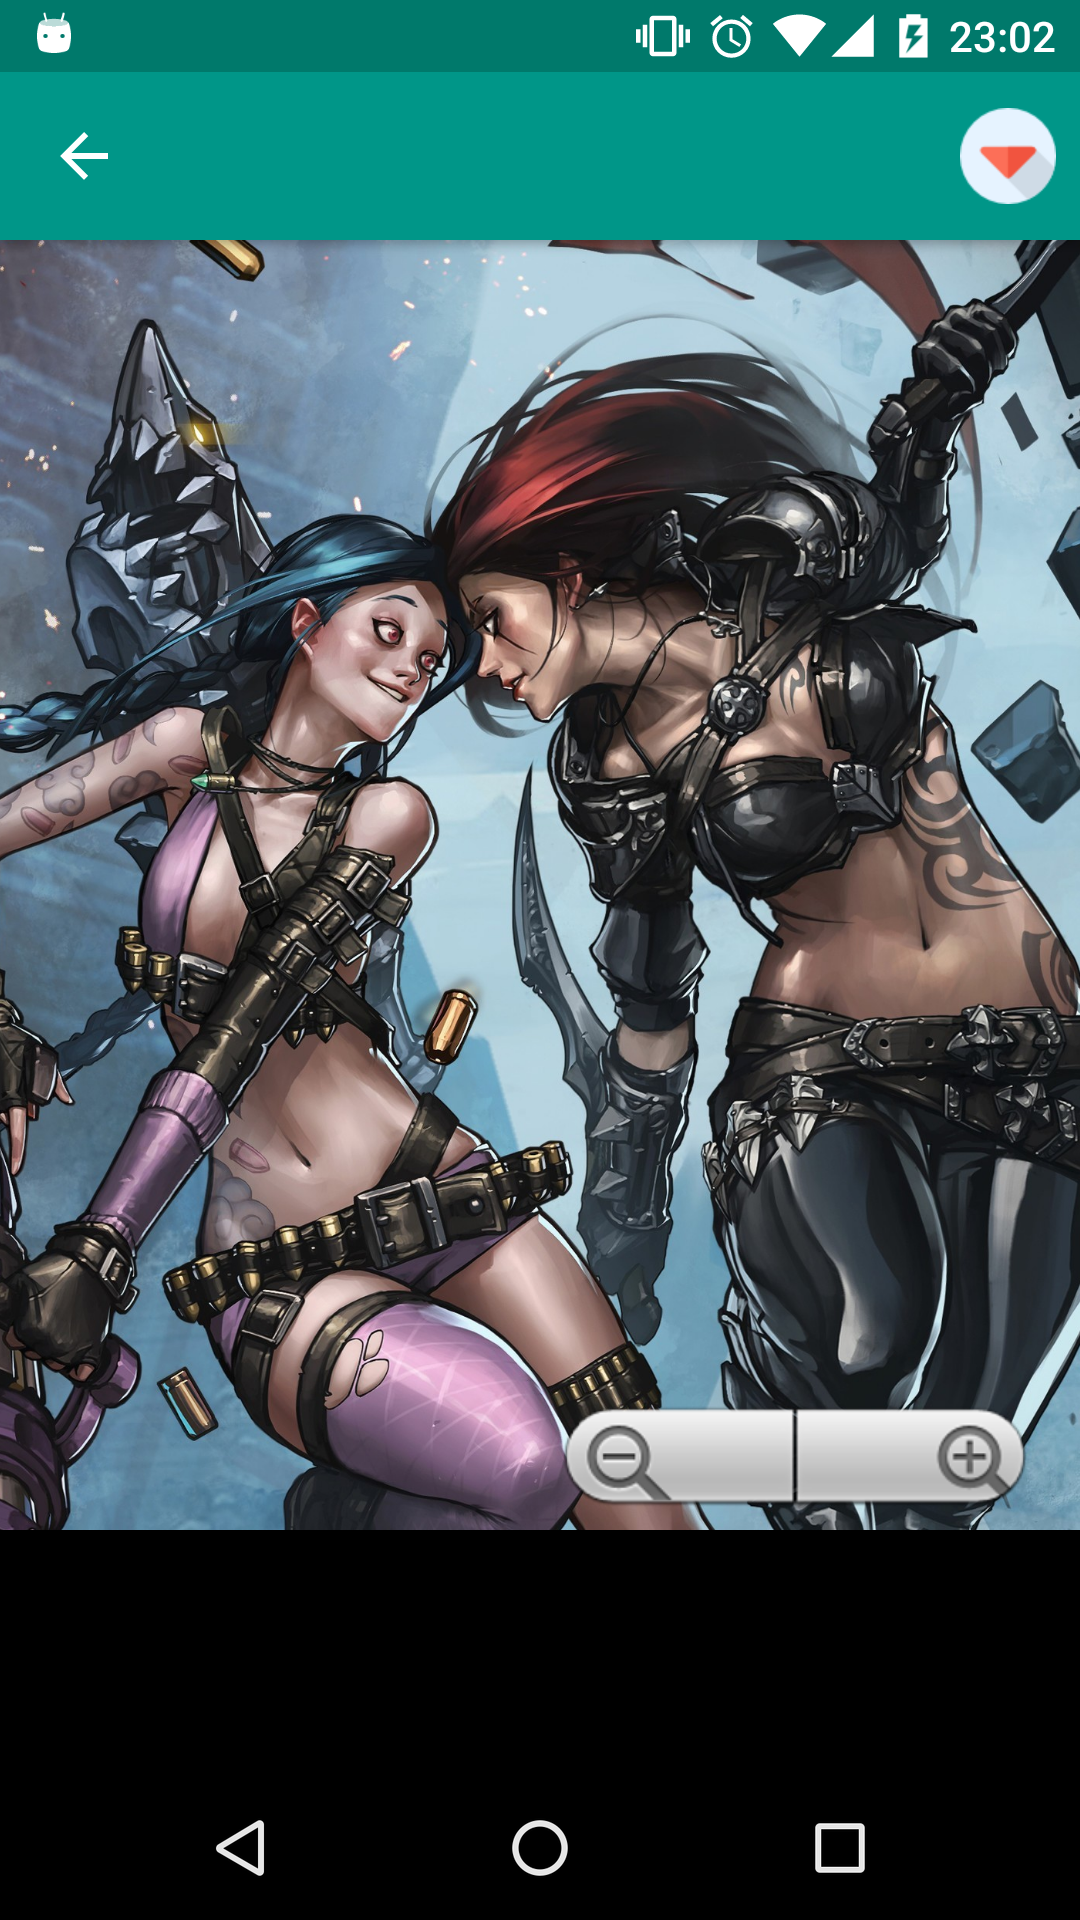 League of Legends wallpapers apk,legends,app,erotica,femboy,for,hentai,pictures,sexy,league,download,pics,image,futanari,henati,android,mature,backgrounds,manga,hentia,wallpapers,porn,search,galleries